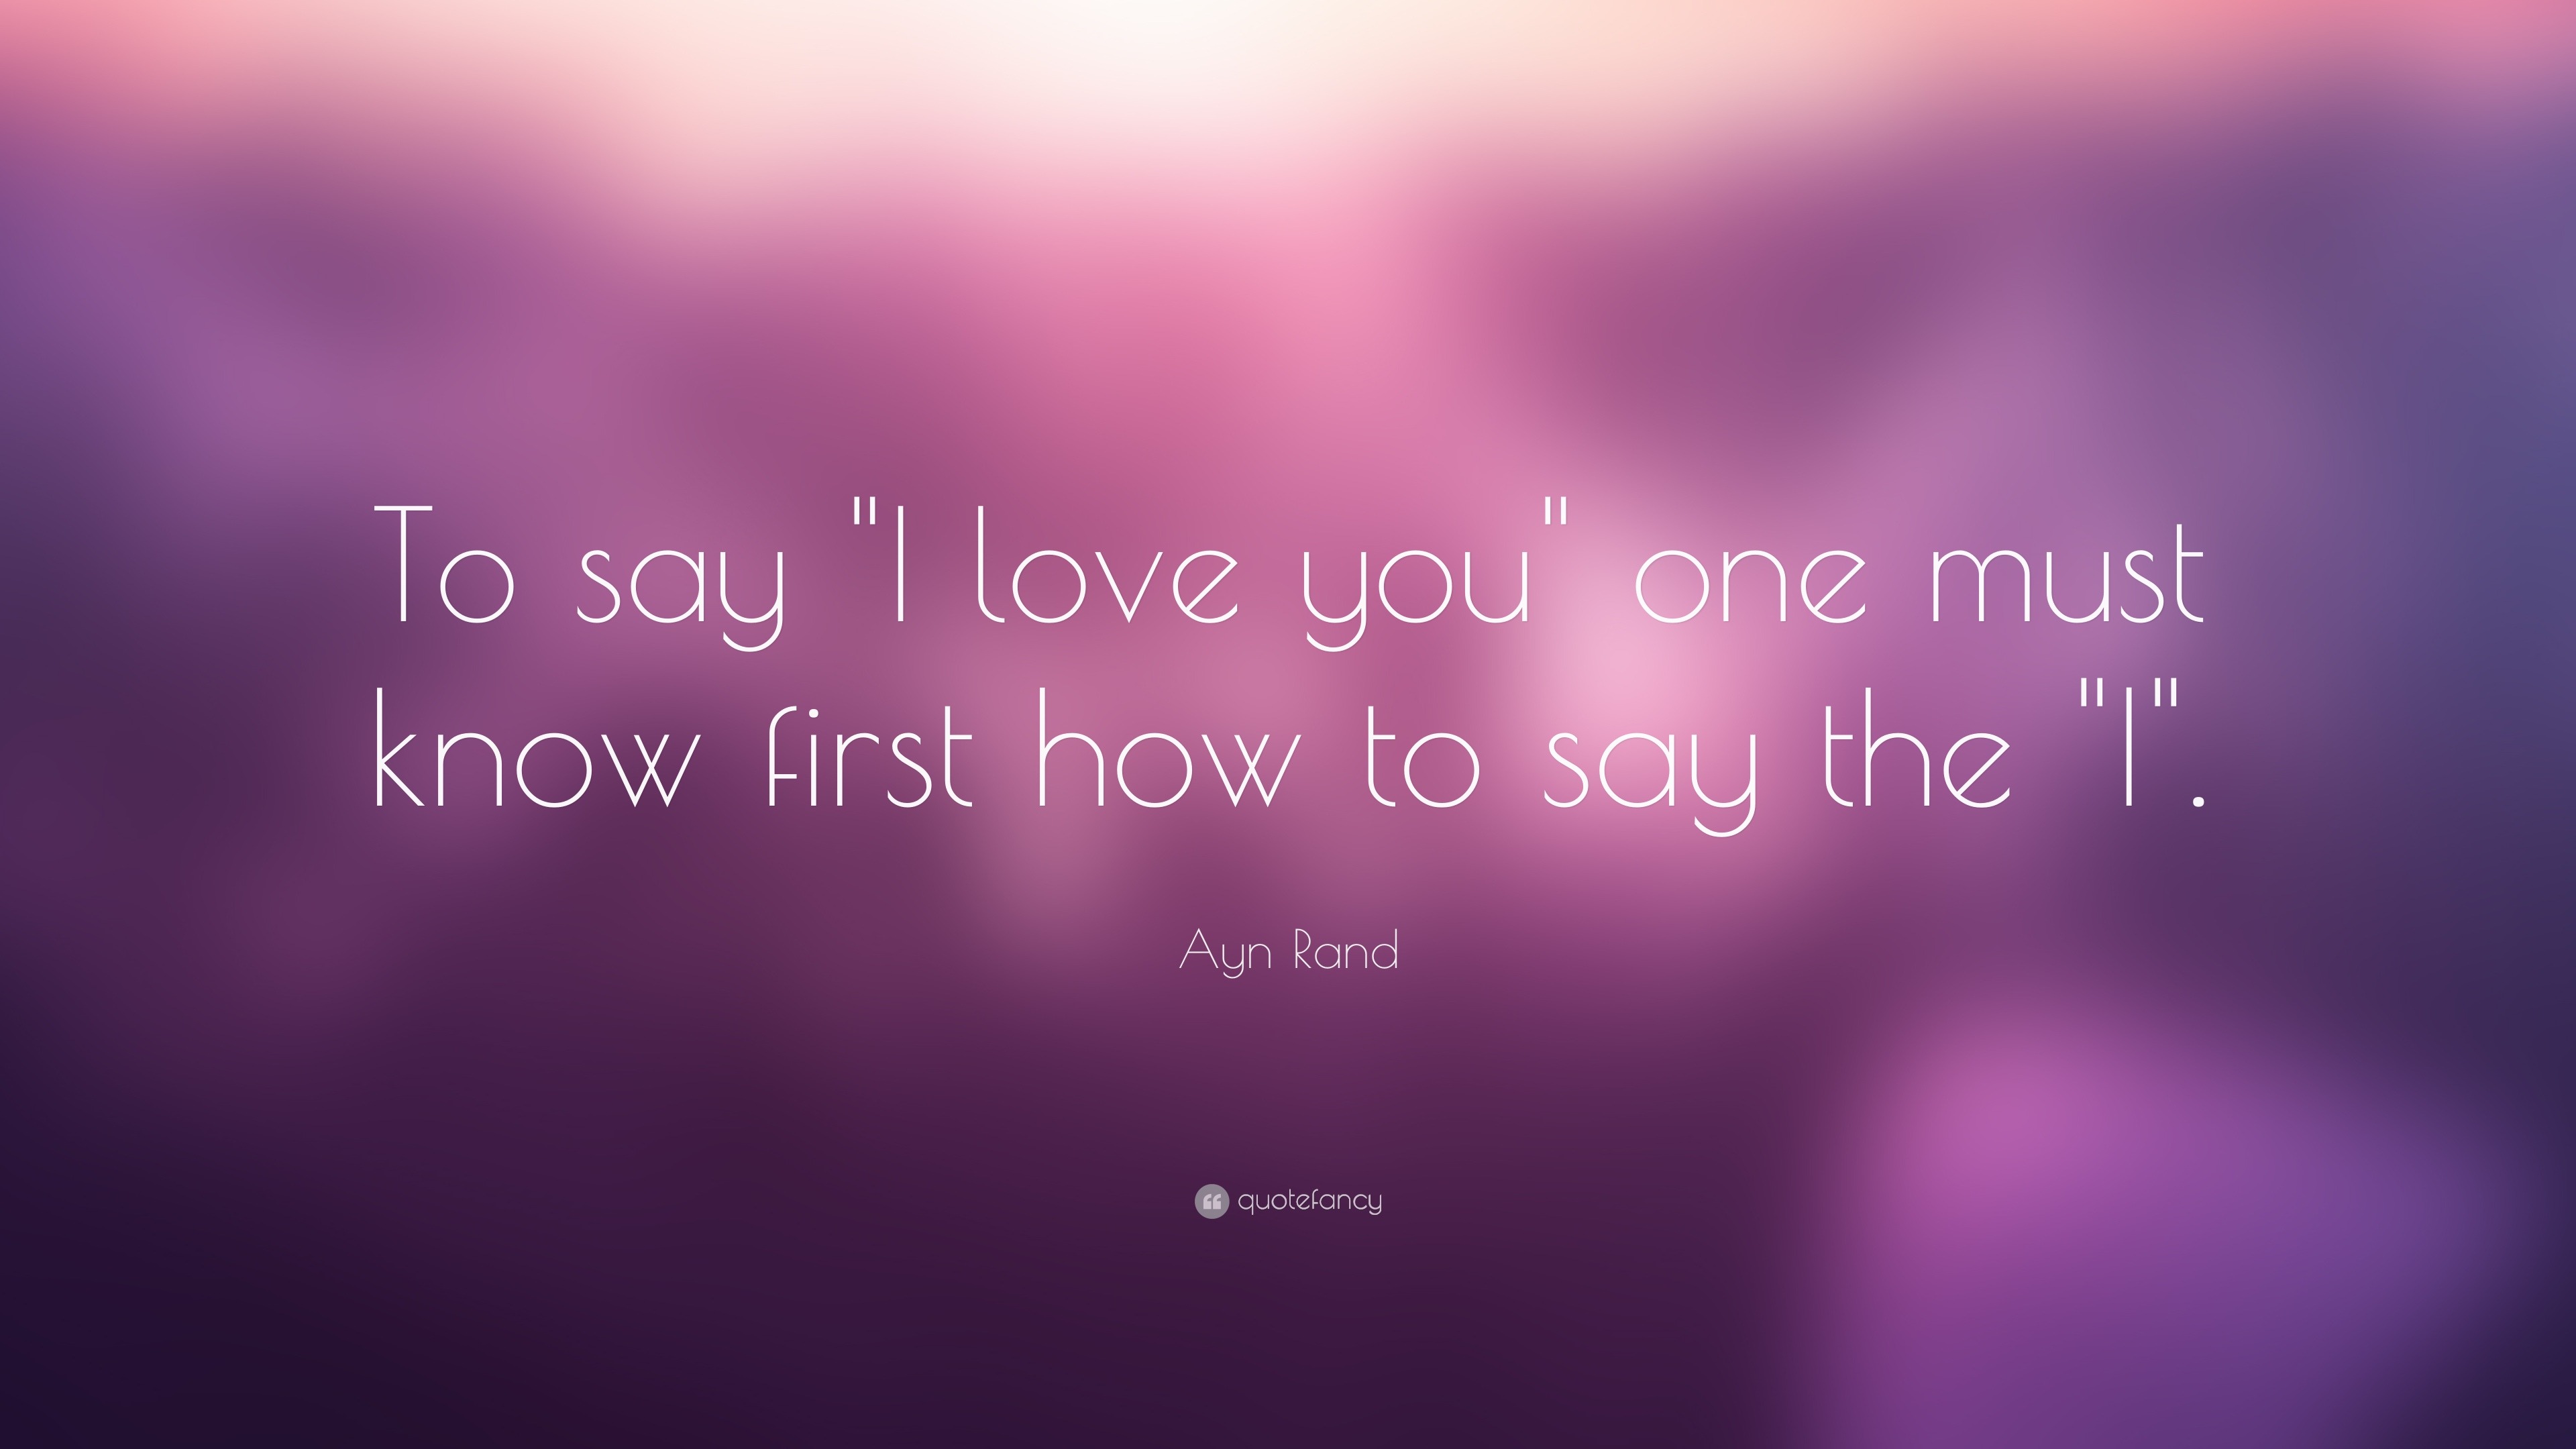 Ayn Rand Quote “To say "I love you" one must know first